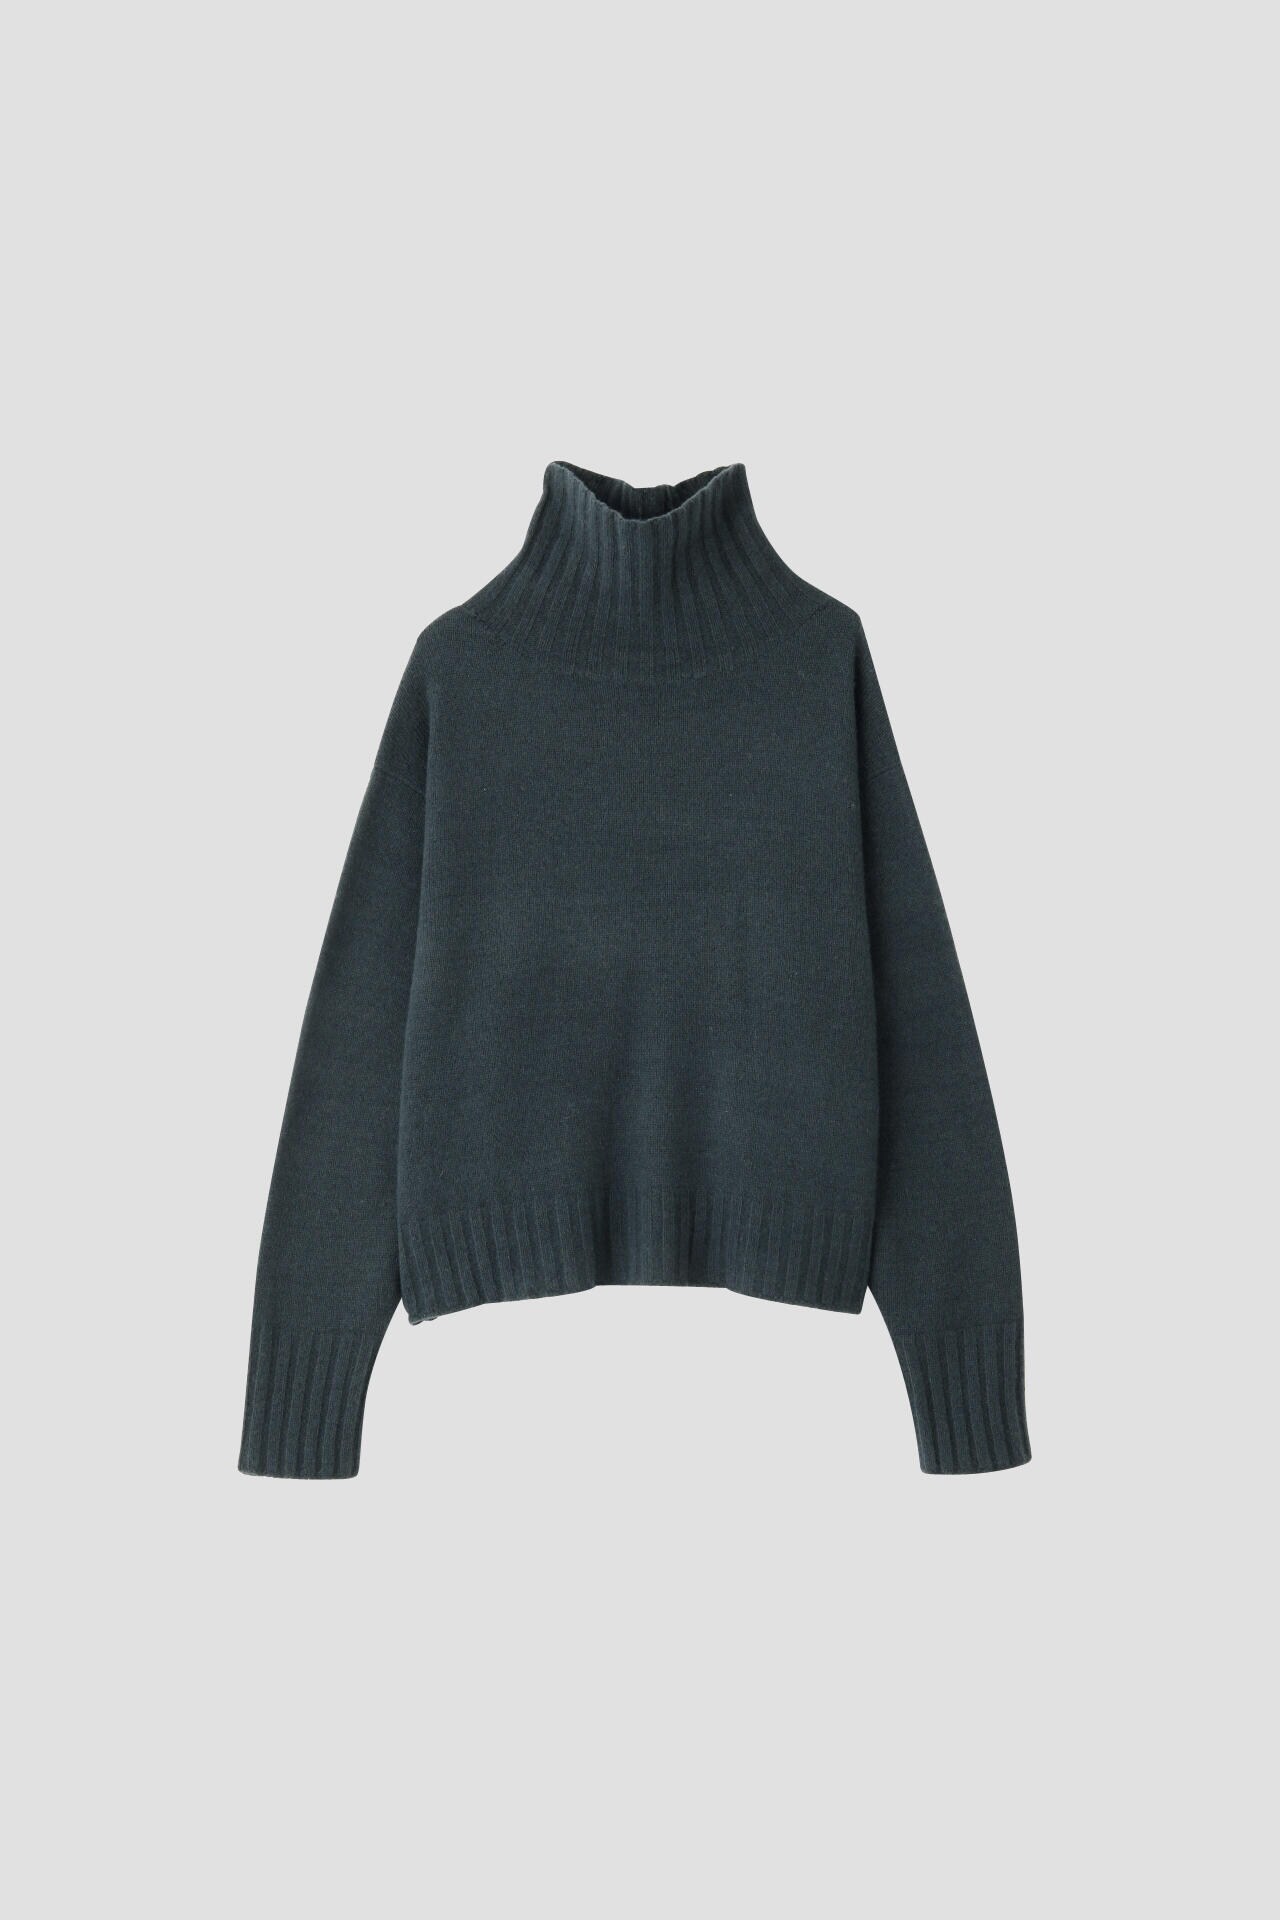 WOOL CASHMERE16